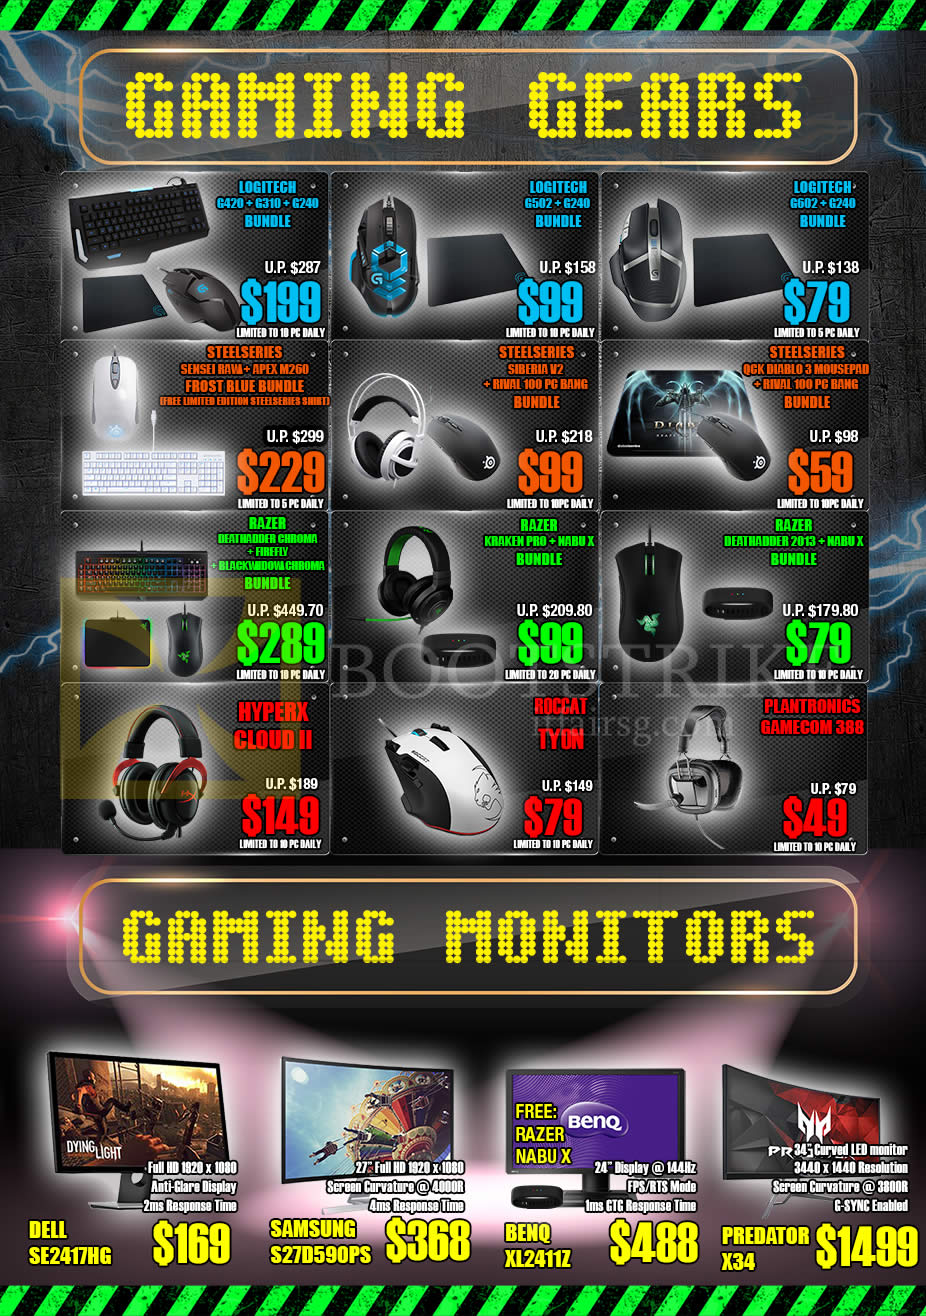 PC SHOW 2016 price list image brochure of Gamepro Accessories Mouse, Keyboard, Headset, Monitors Dell Sasmung Benq Predator